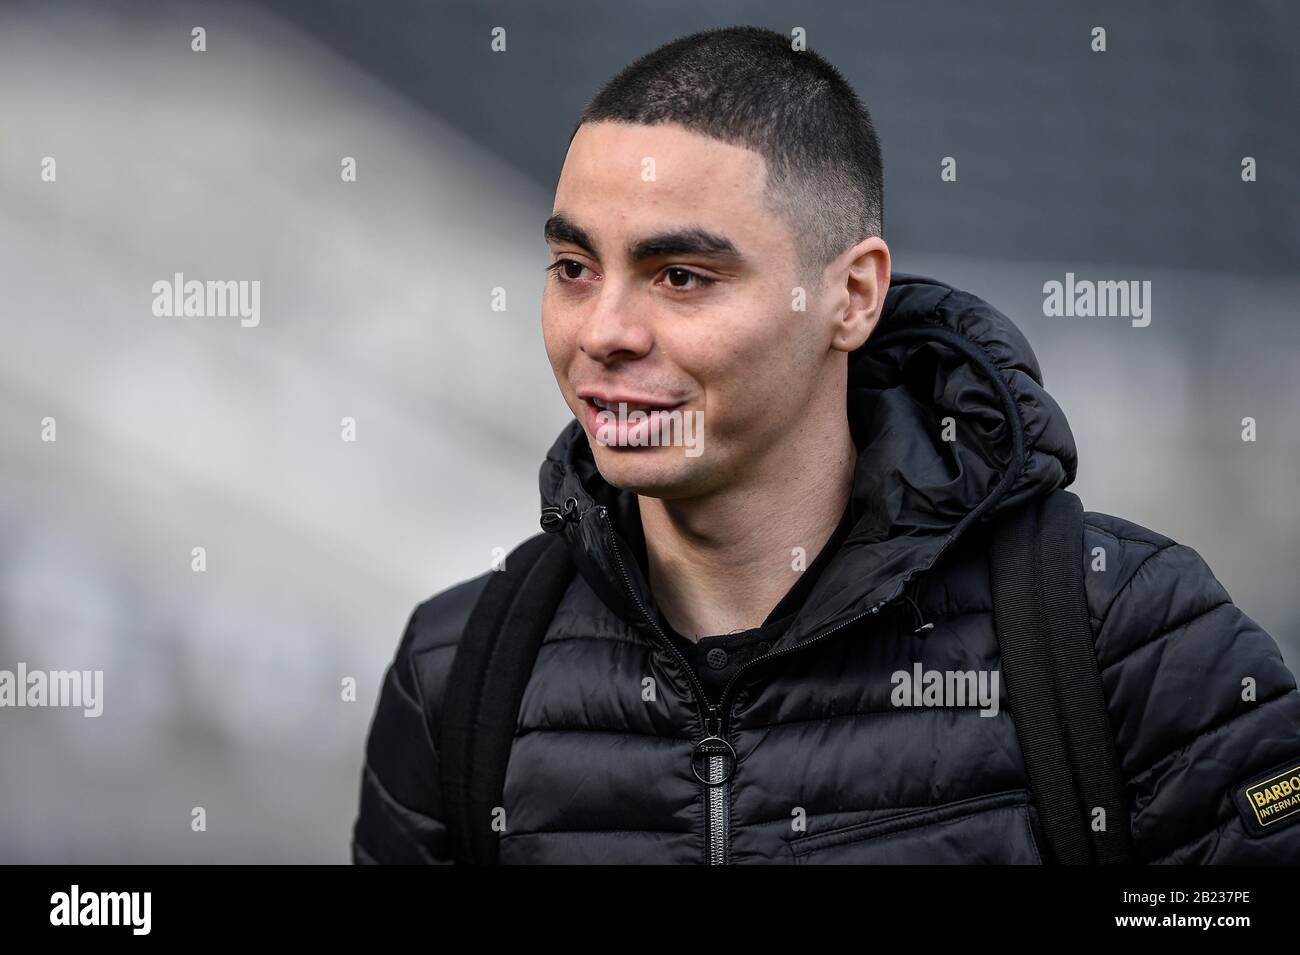 NEWCASTLE UPON TYNE, ENGLAND - FEBRUARY 29TH Miguel Almir-n (24) of Newcastle United arriving before the Premier League match between Newcastle United and Burnley at St. James's Park, Newcastle on Saturday 29th February 2020. (Credit: Iam Burn | MI News) Photograph may only be used for newspaper and/or magazine editorial purposes, license required for commercial use Credit: MI News & Sport /Alamy Live News Stock Photo